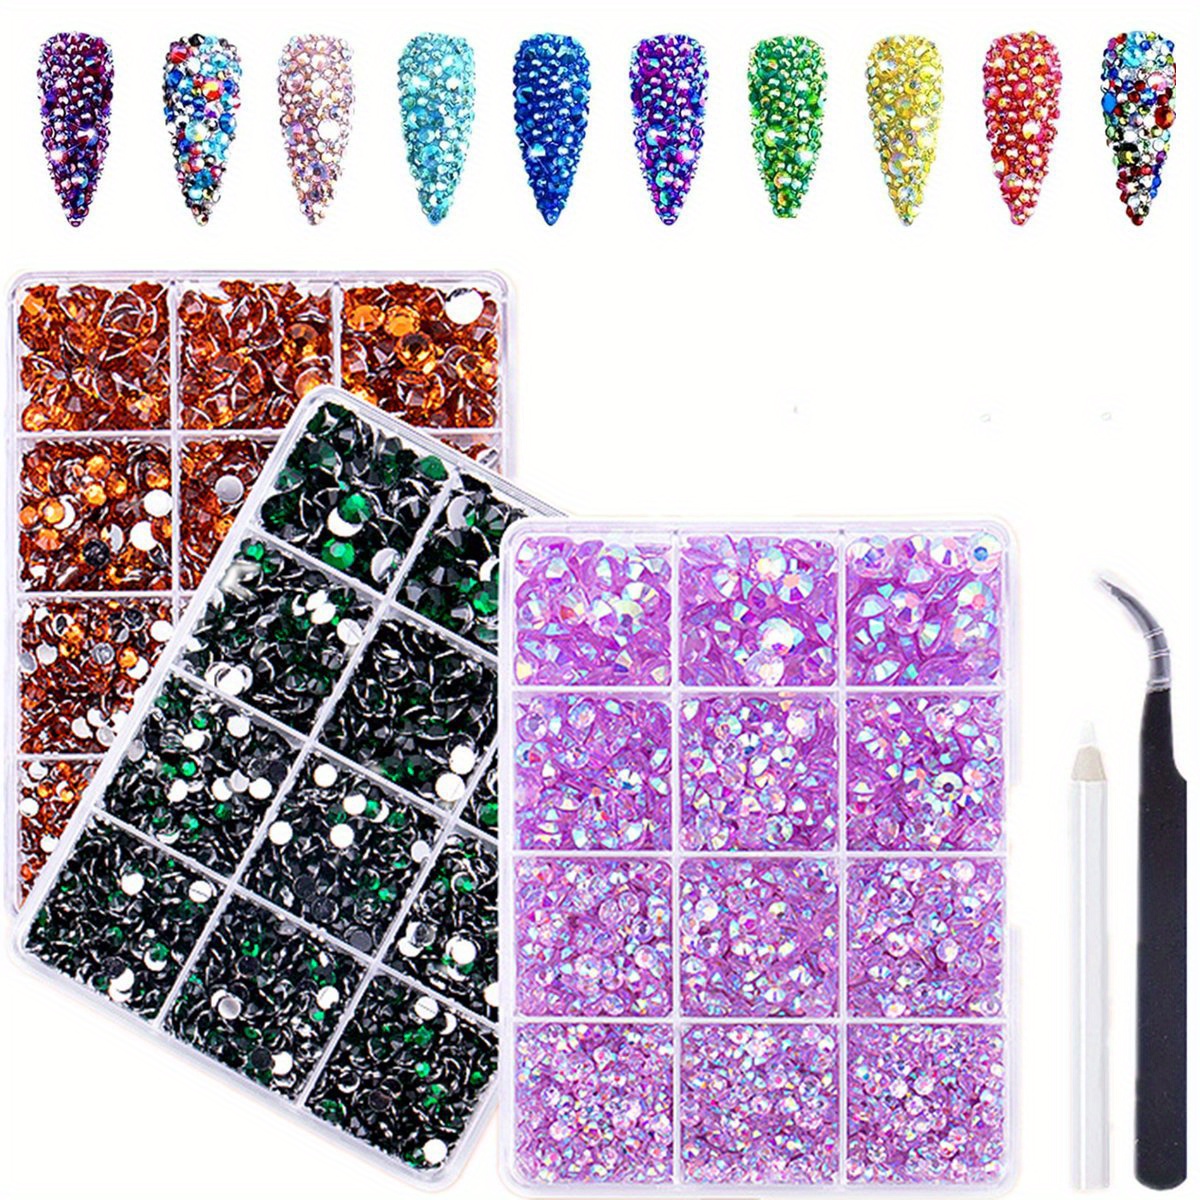 HEIQI DIY Tooth Gem Kit with UV Glue and Light，Professional Crystals  Jewelry kit, Teeth Gems Kit Fashionable Removable Tooth Ornaments, Great Tooth  Gems Kit for DIY Use-Q3 - Wishupon